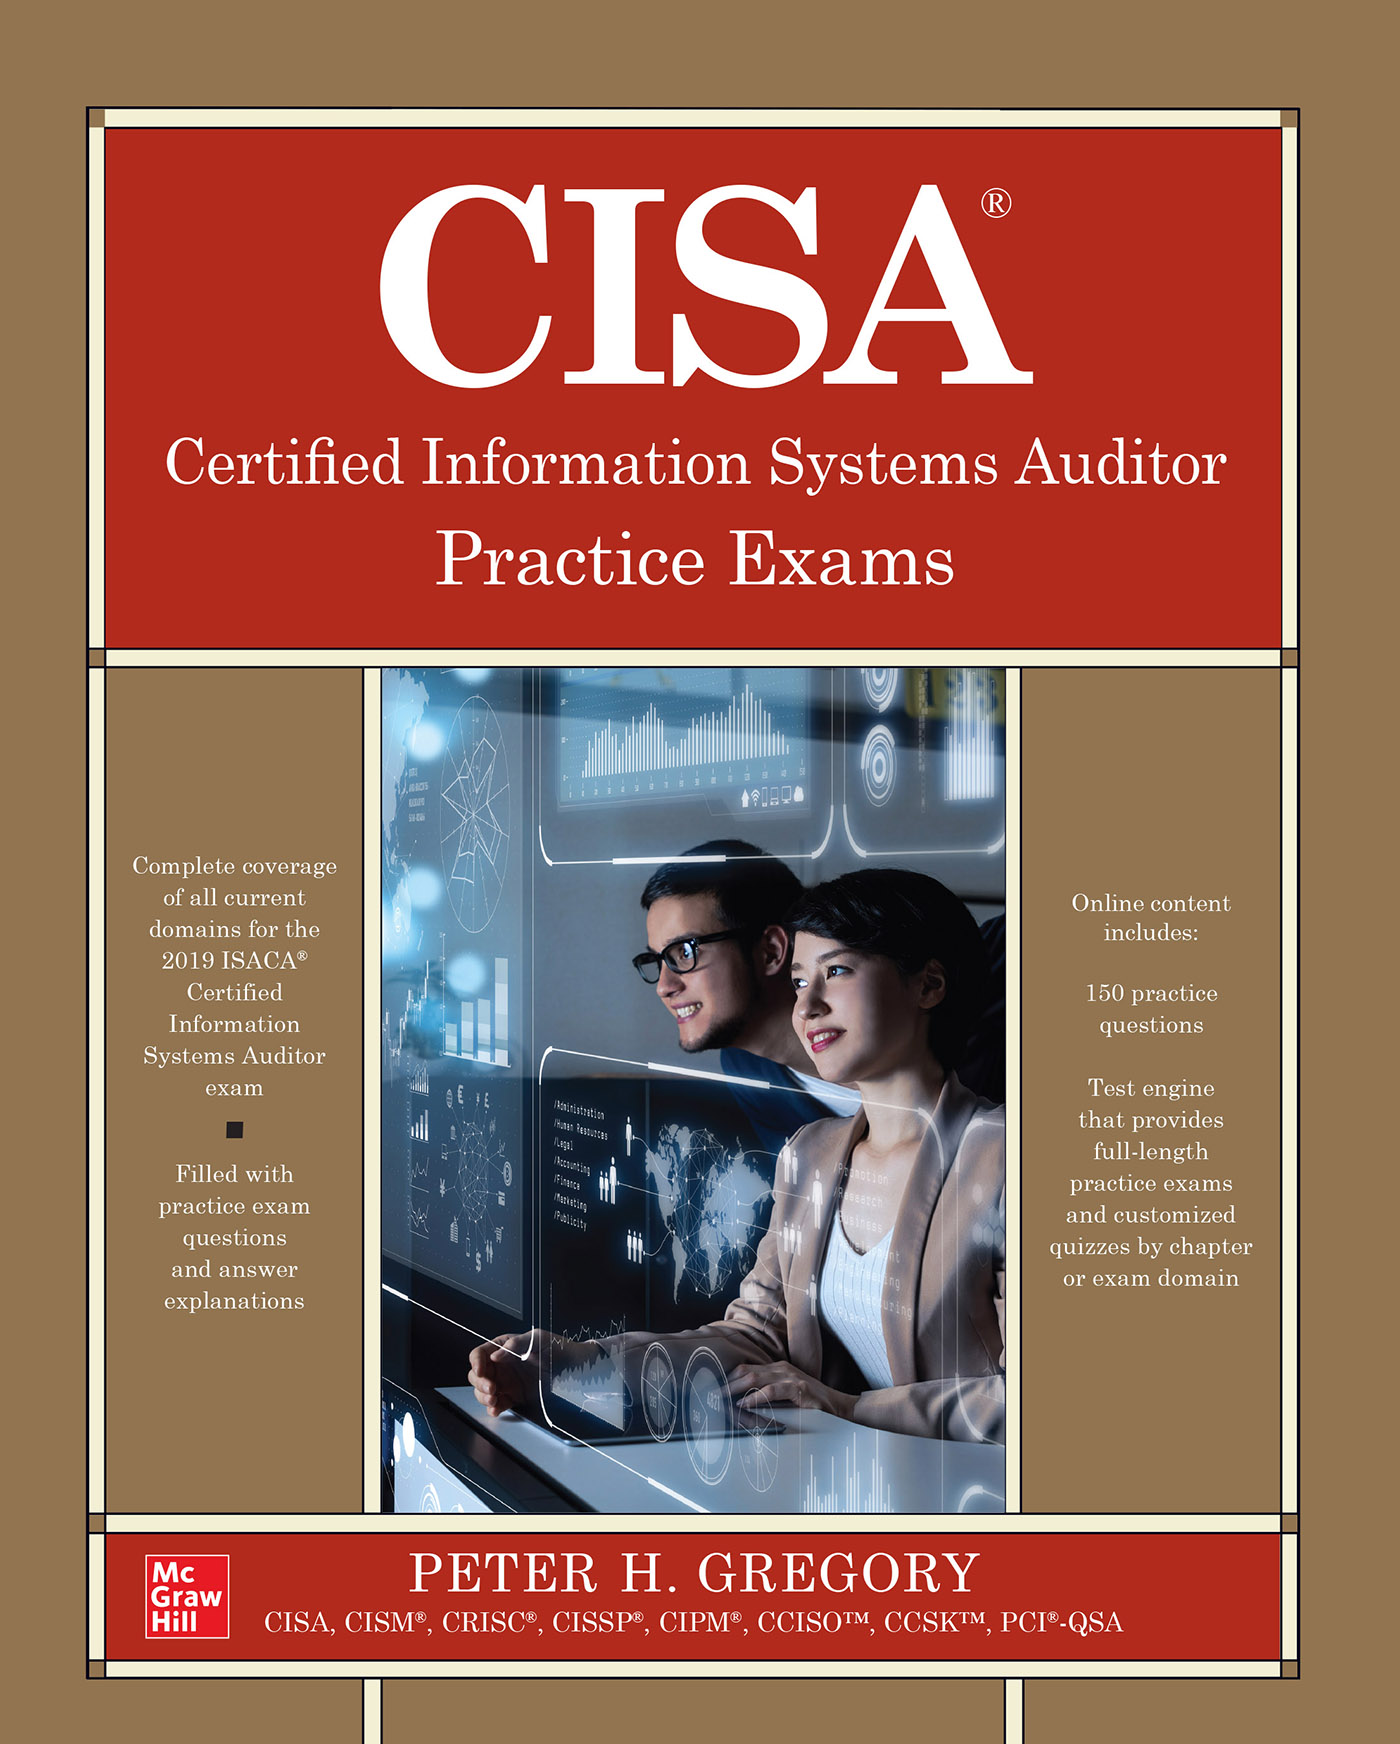 CISA Certified Information Systems Auditor Practice Exams eBook Download Free Book in pdf, Peter H. Gregory, Learning PUBLICATION, March 2022, 465 pages.